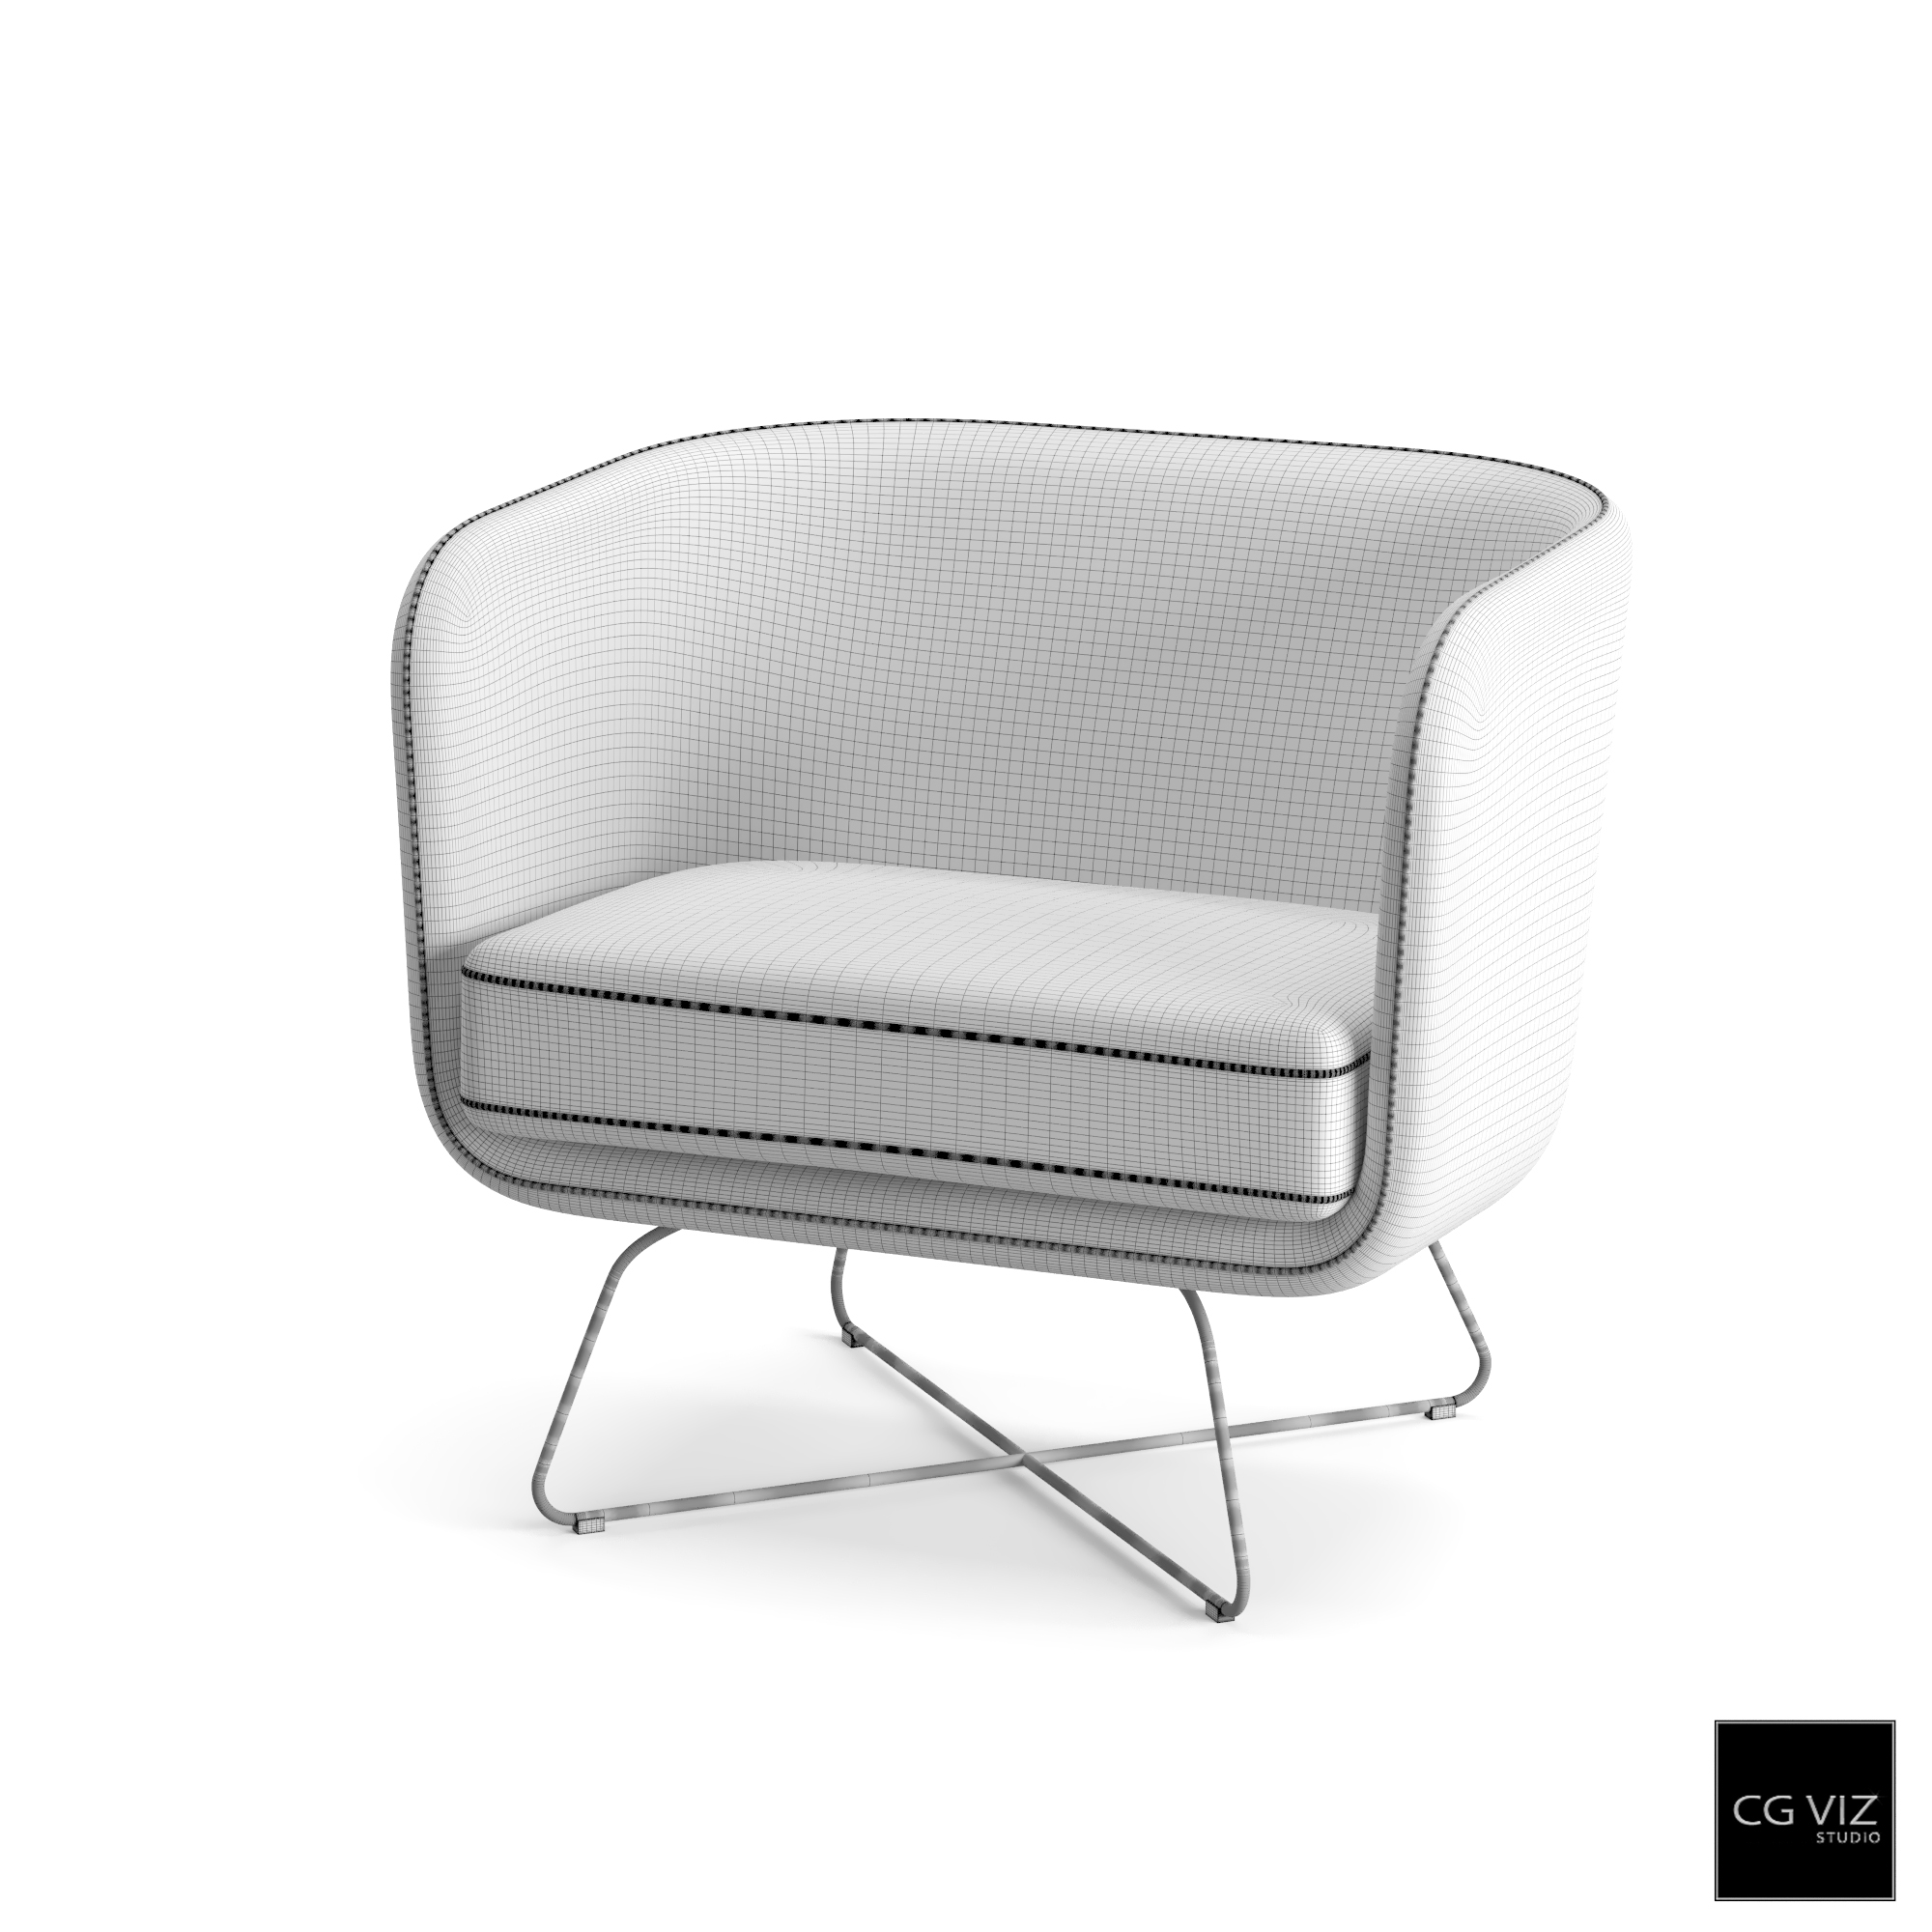 Wireframe View of Rockwell Club Chair 3D Model